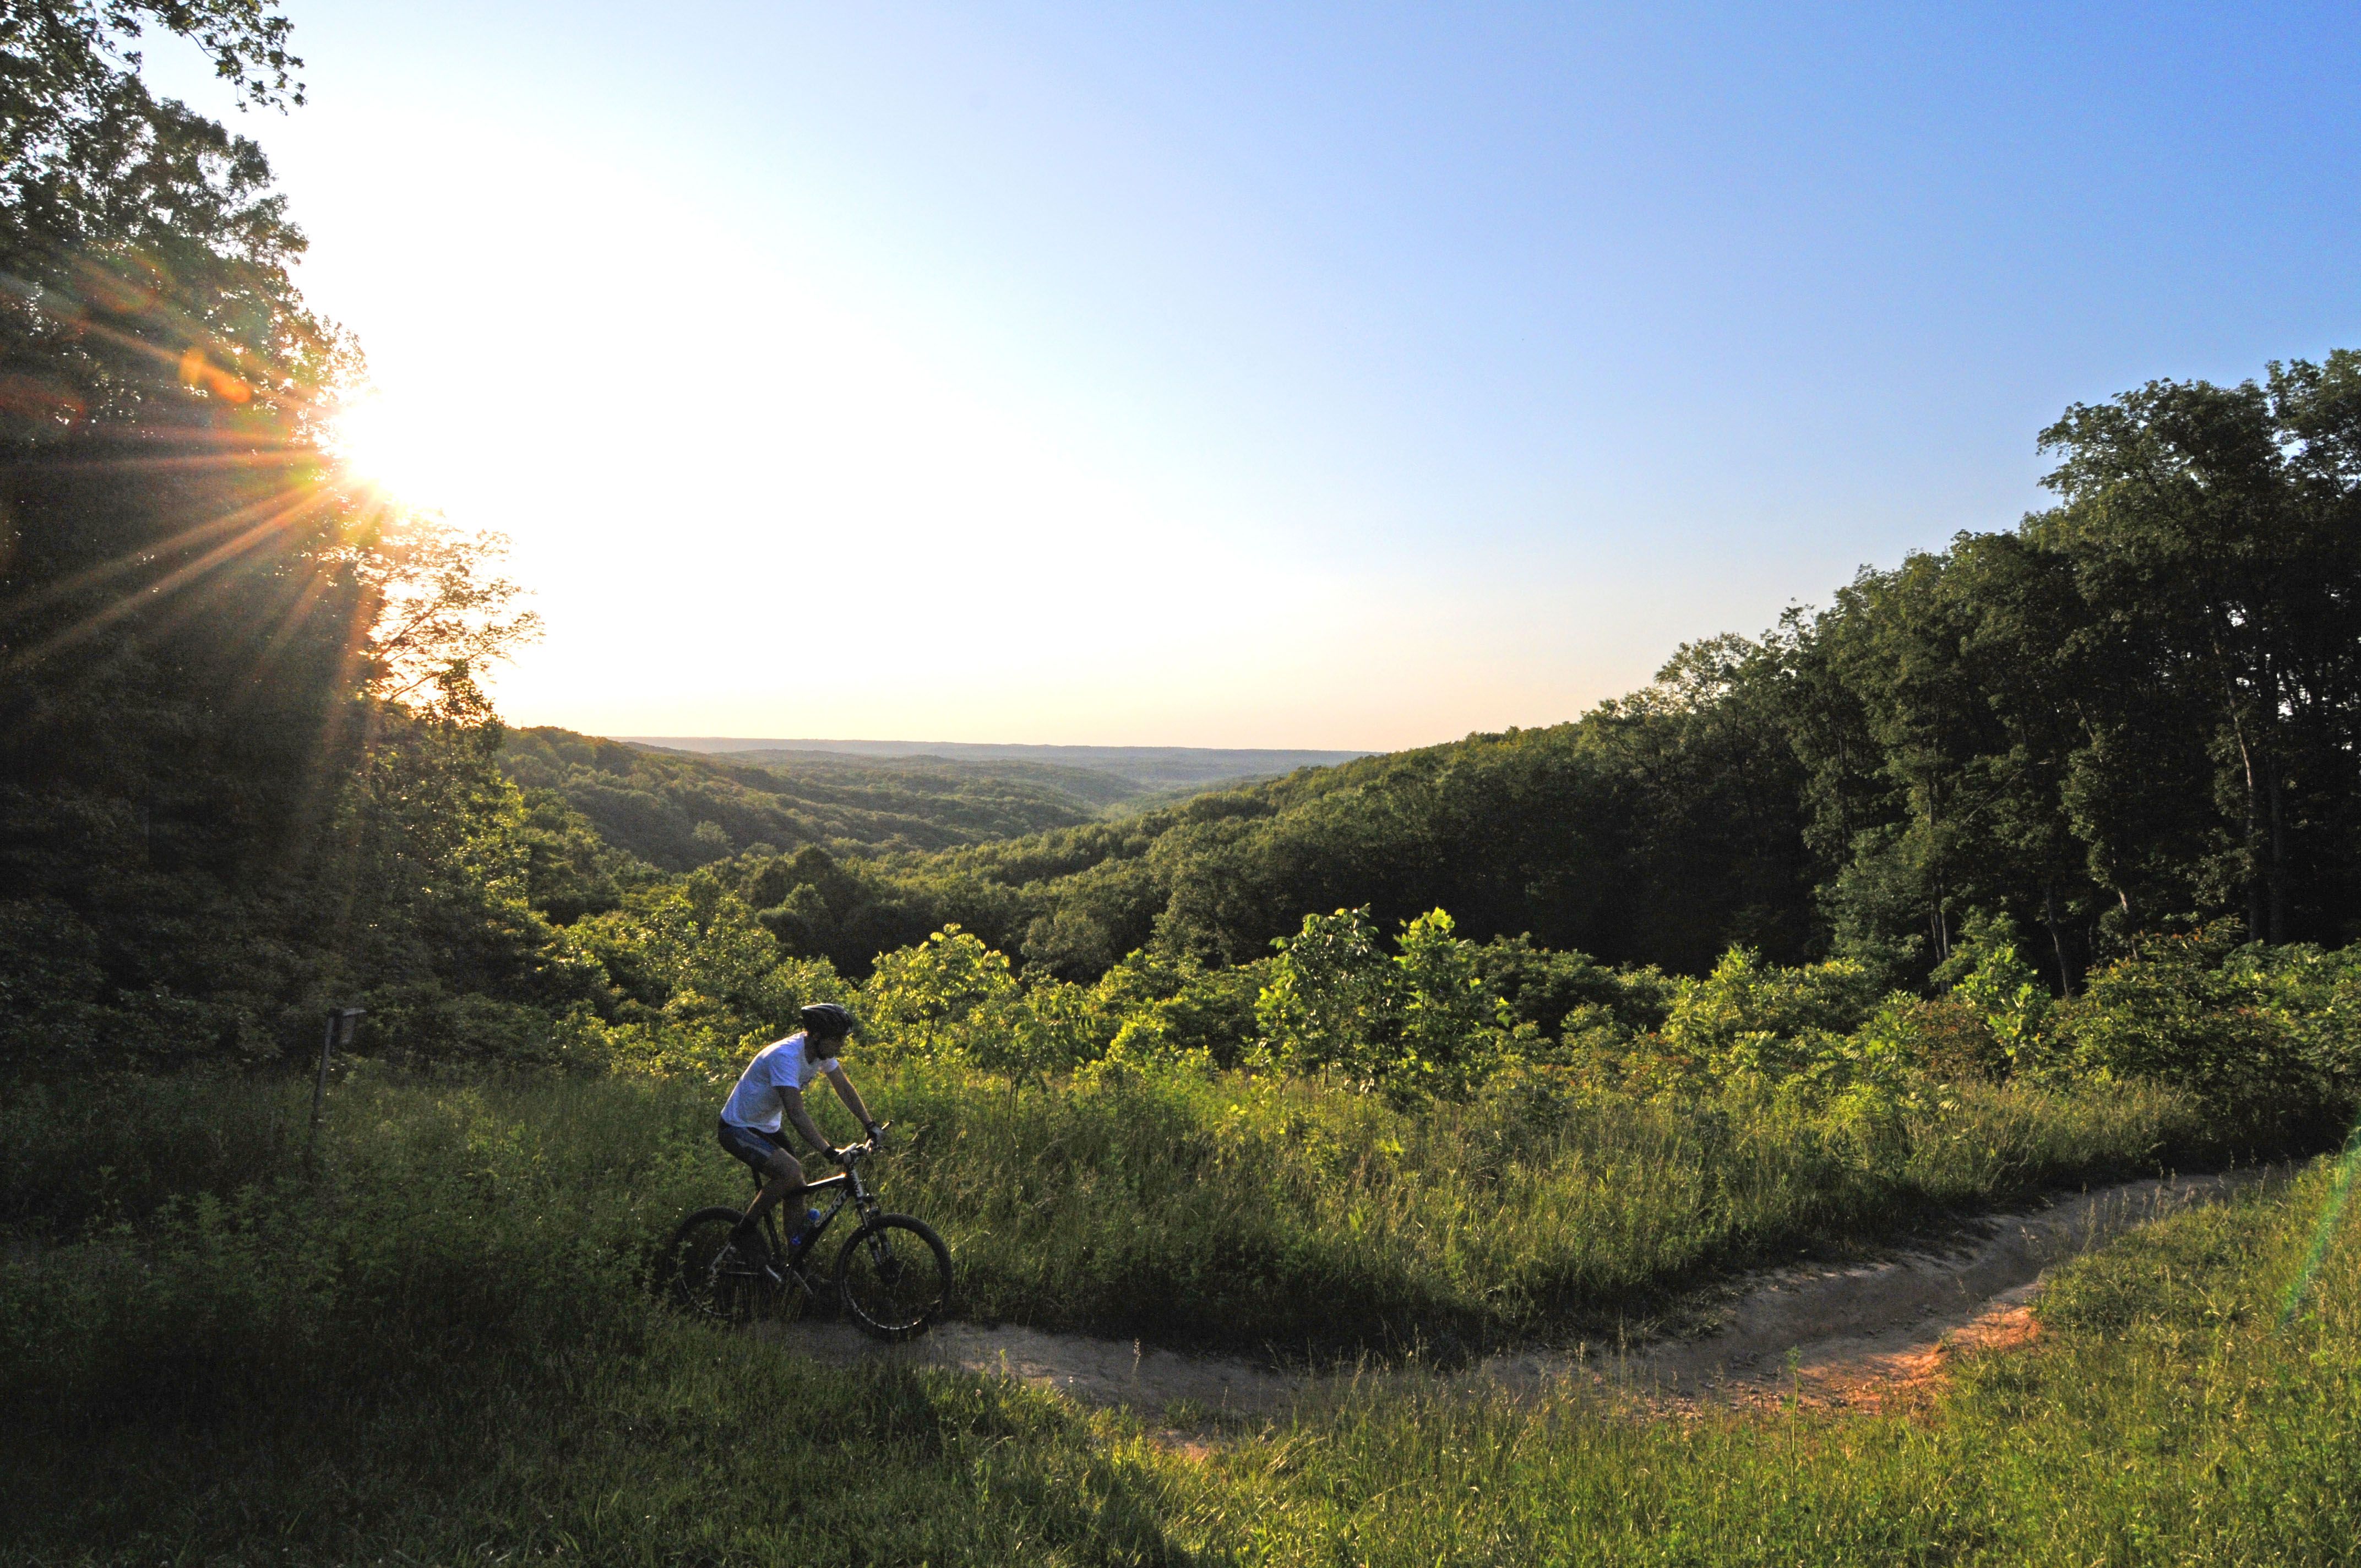 state parks with bike trails near me